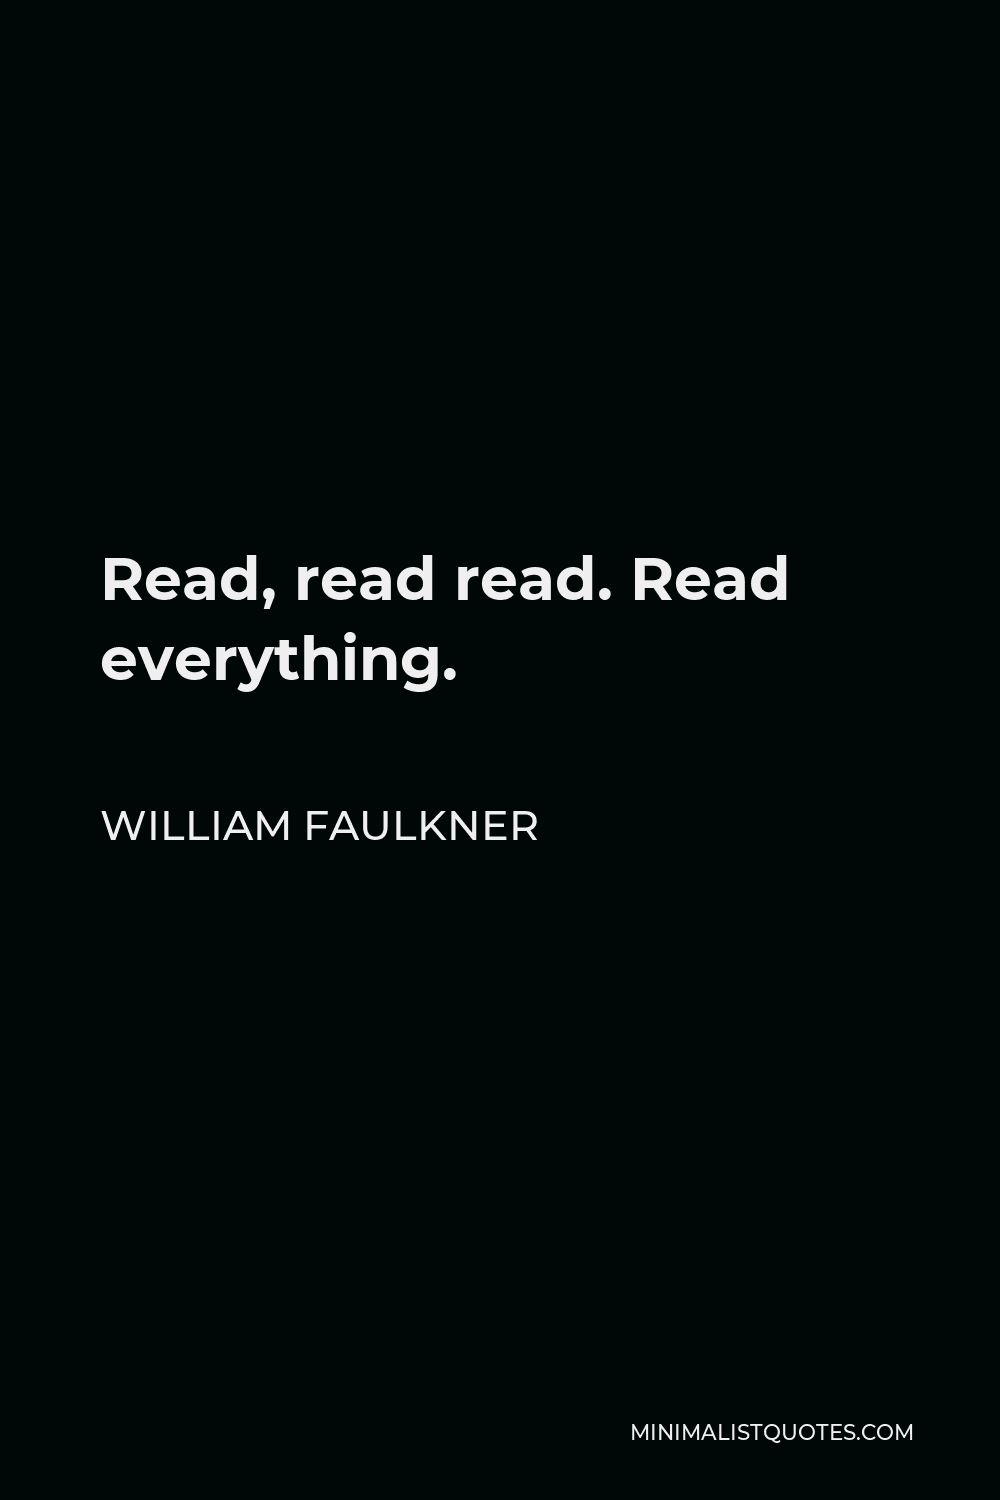 William Faulkner Quote - Read, read read. Read everything.